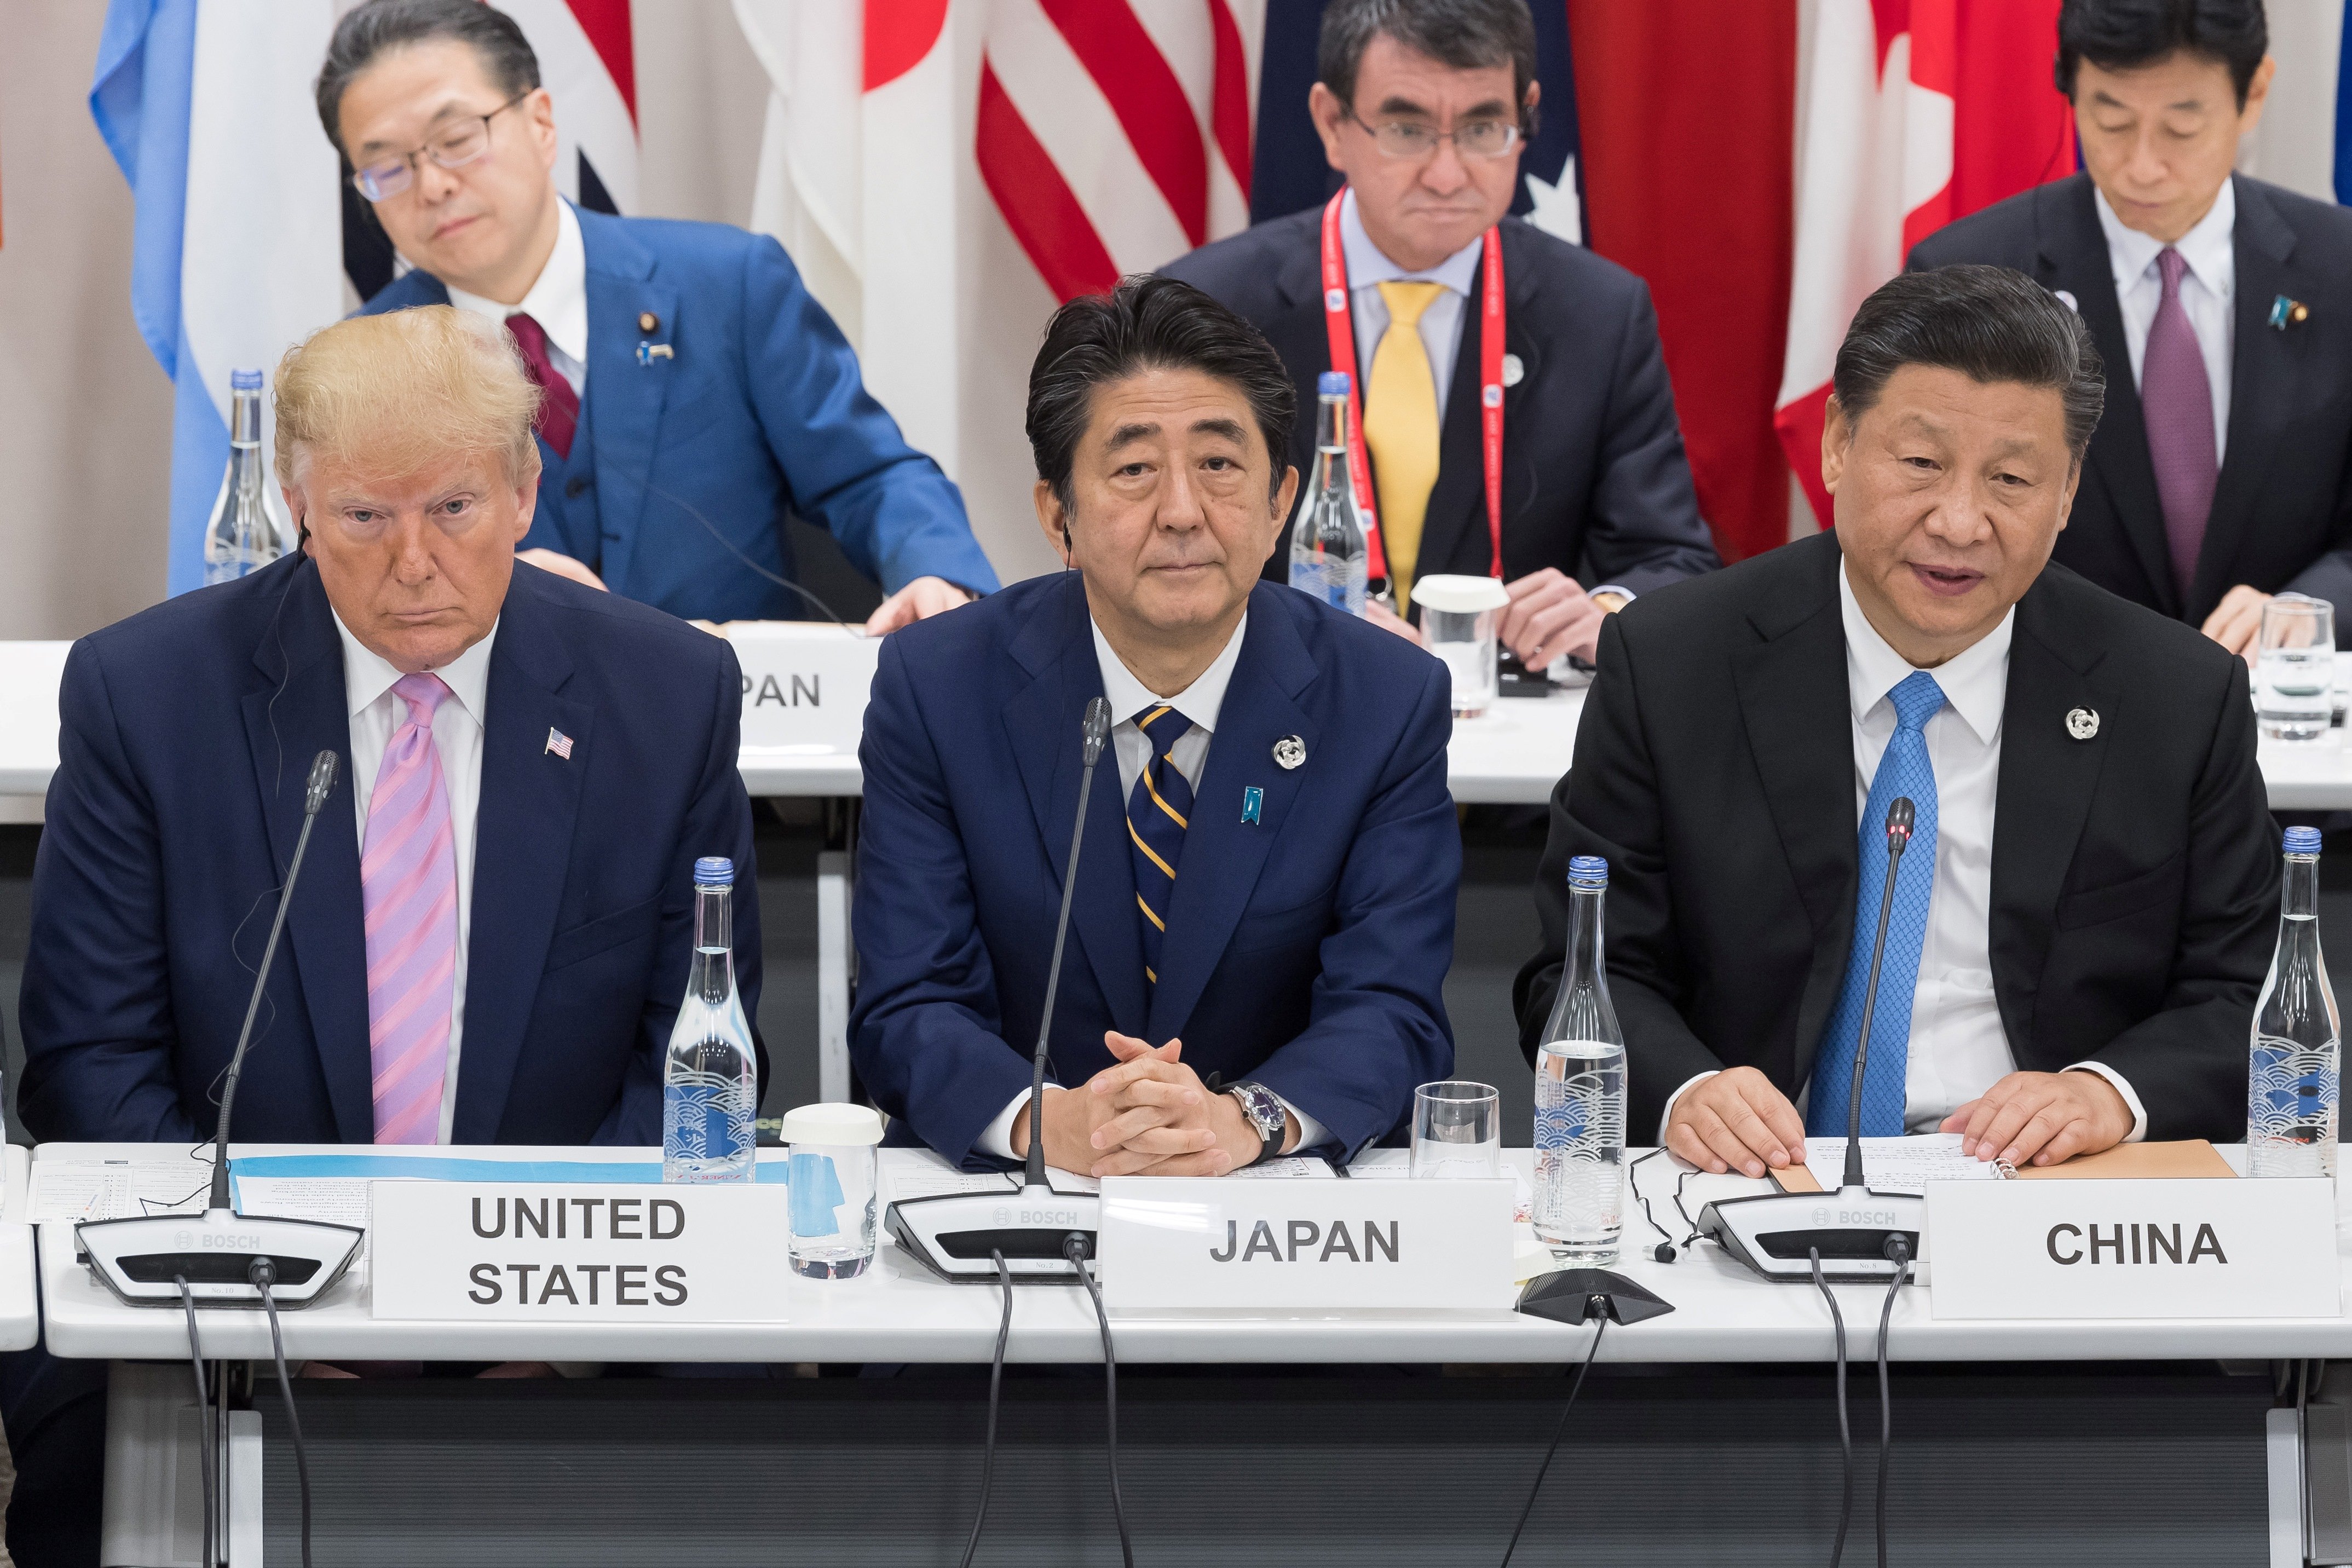 US President Donald Trump (L) sits with Japan's Prime Minister Shinzo Abe (C) and China's President Xi Jinping as they attend a meeting on the digital economy at the G20 Summit in Osaka on June 28, 2019. (JACQUES WITT/AFP via Getty Images)